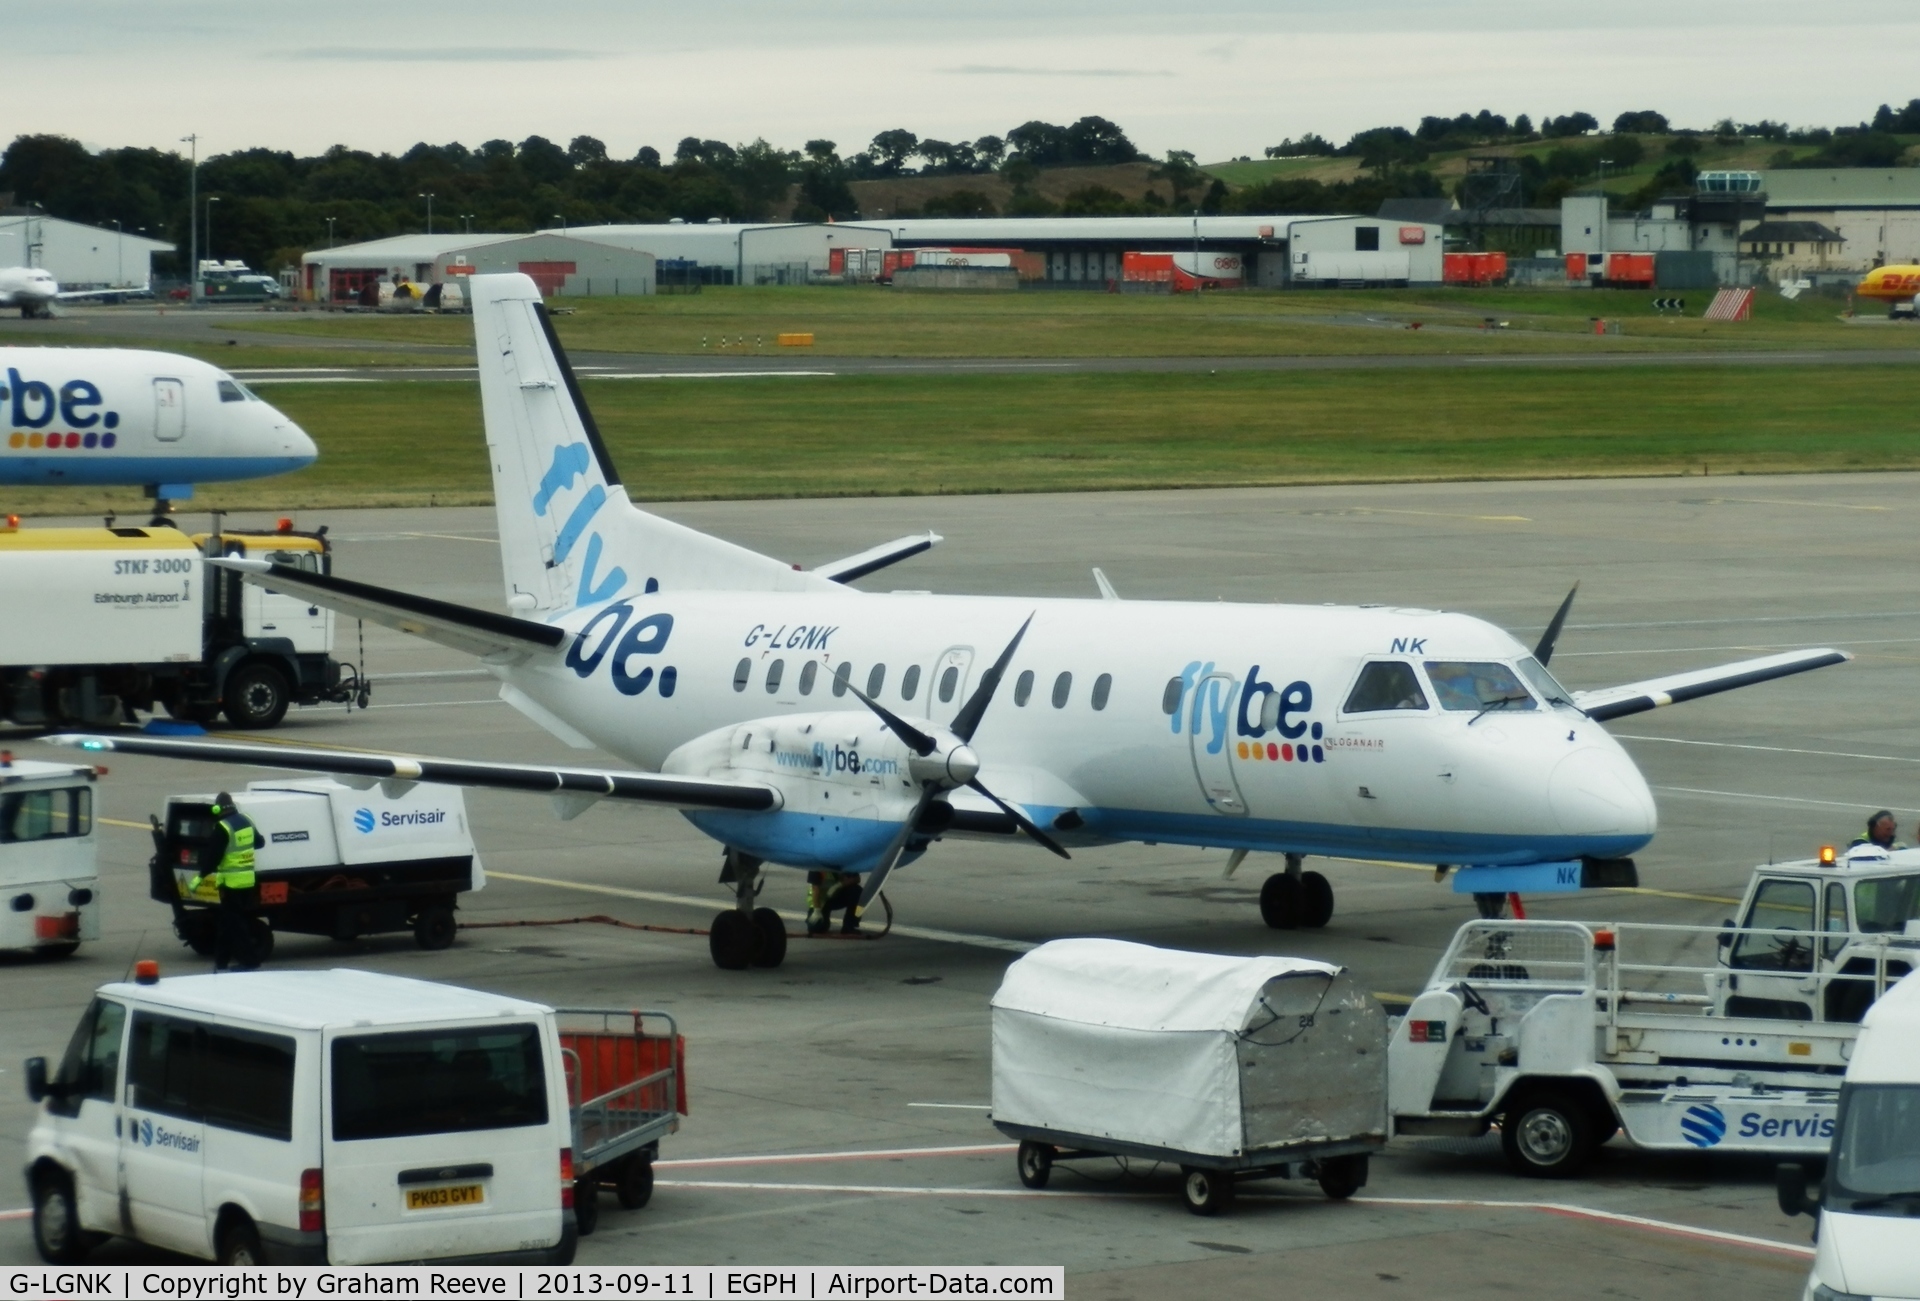 G-LGNK, 1990 Saab 340B C/N 340B-185, A rather busy scene prior to departure.